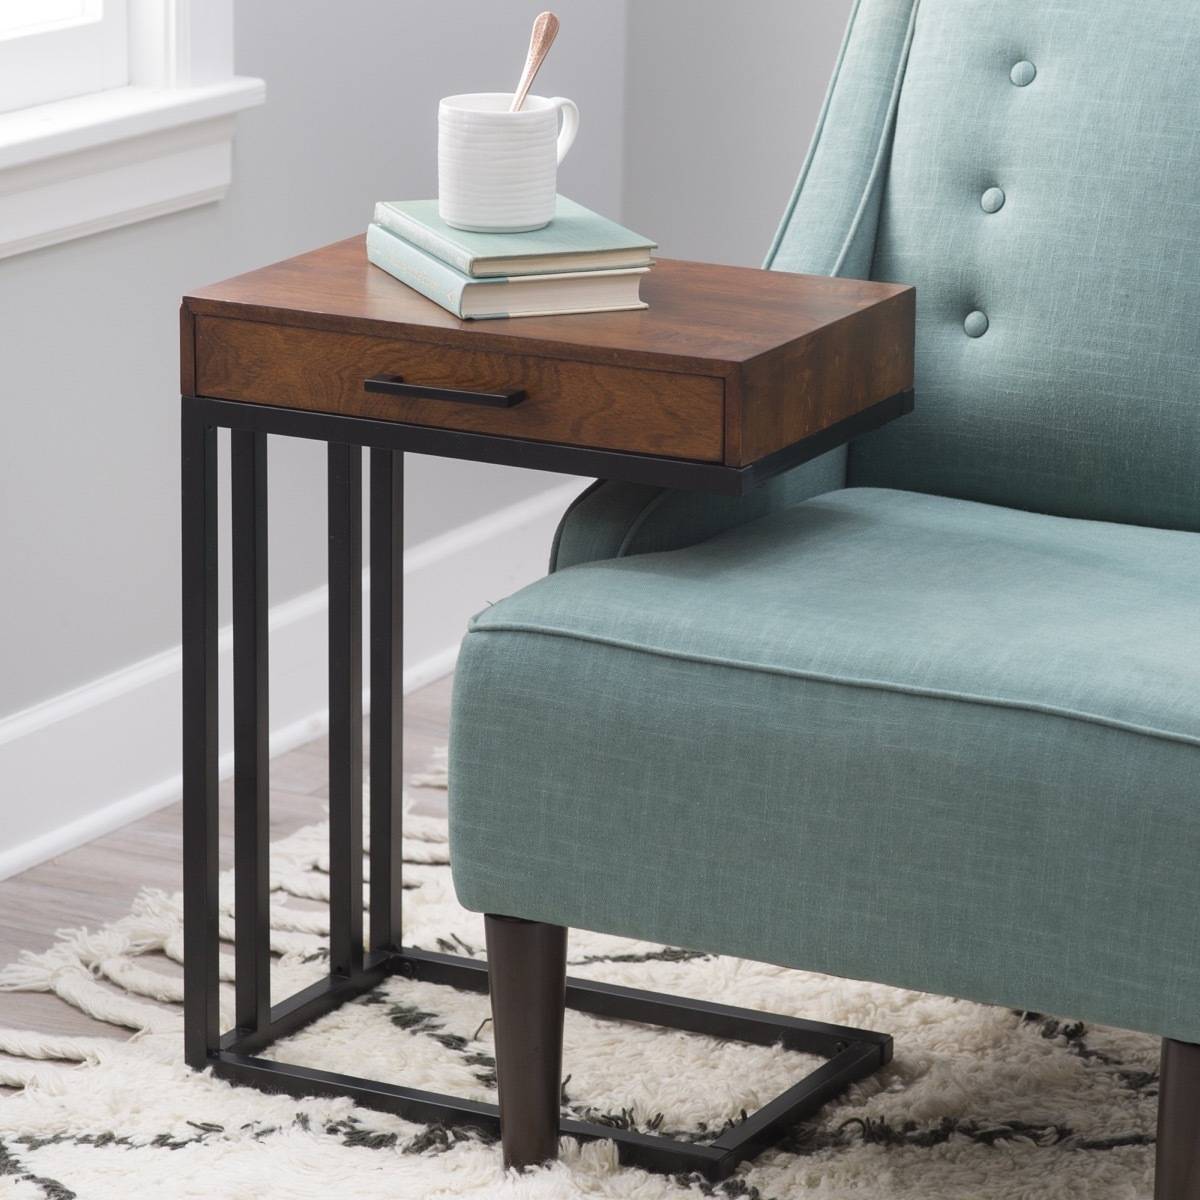 Drake c-table with drawer from Hayneedle